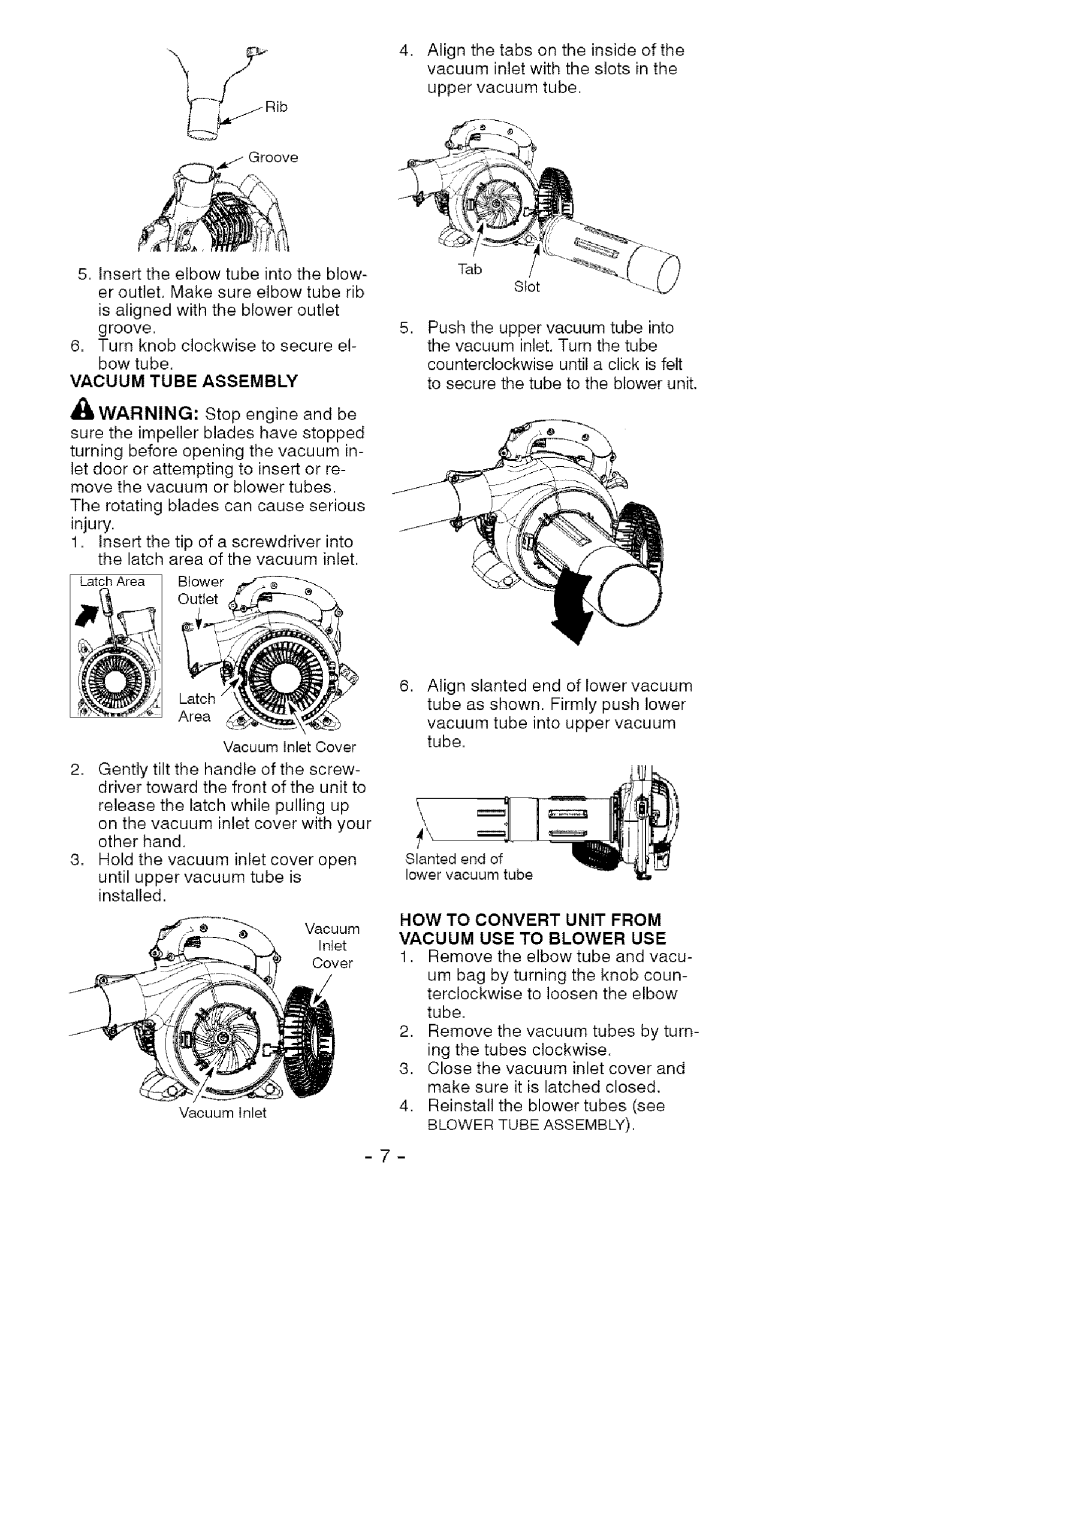 Craftsman 358.79474 manual Vacuum Tube Assembly, How To Convert Unit From Vacuum Use To Blower Use 